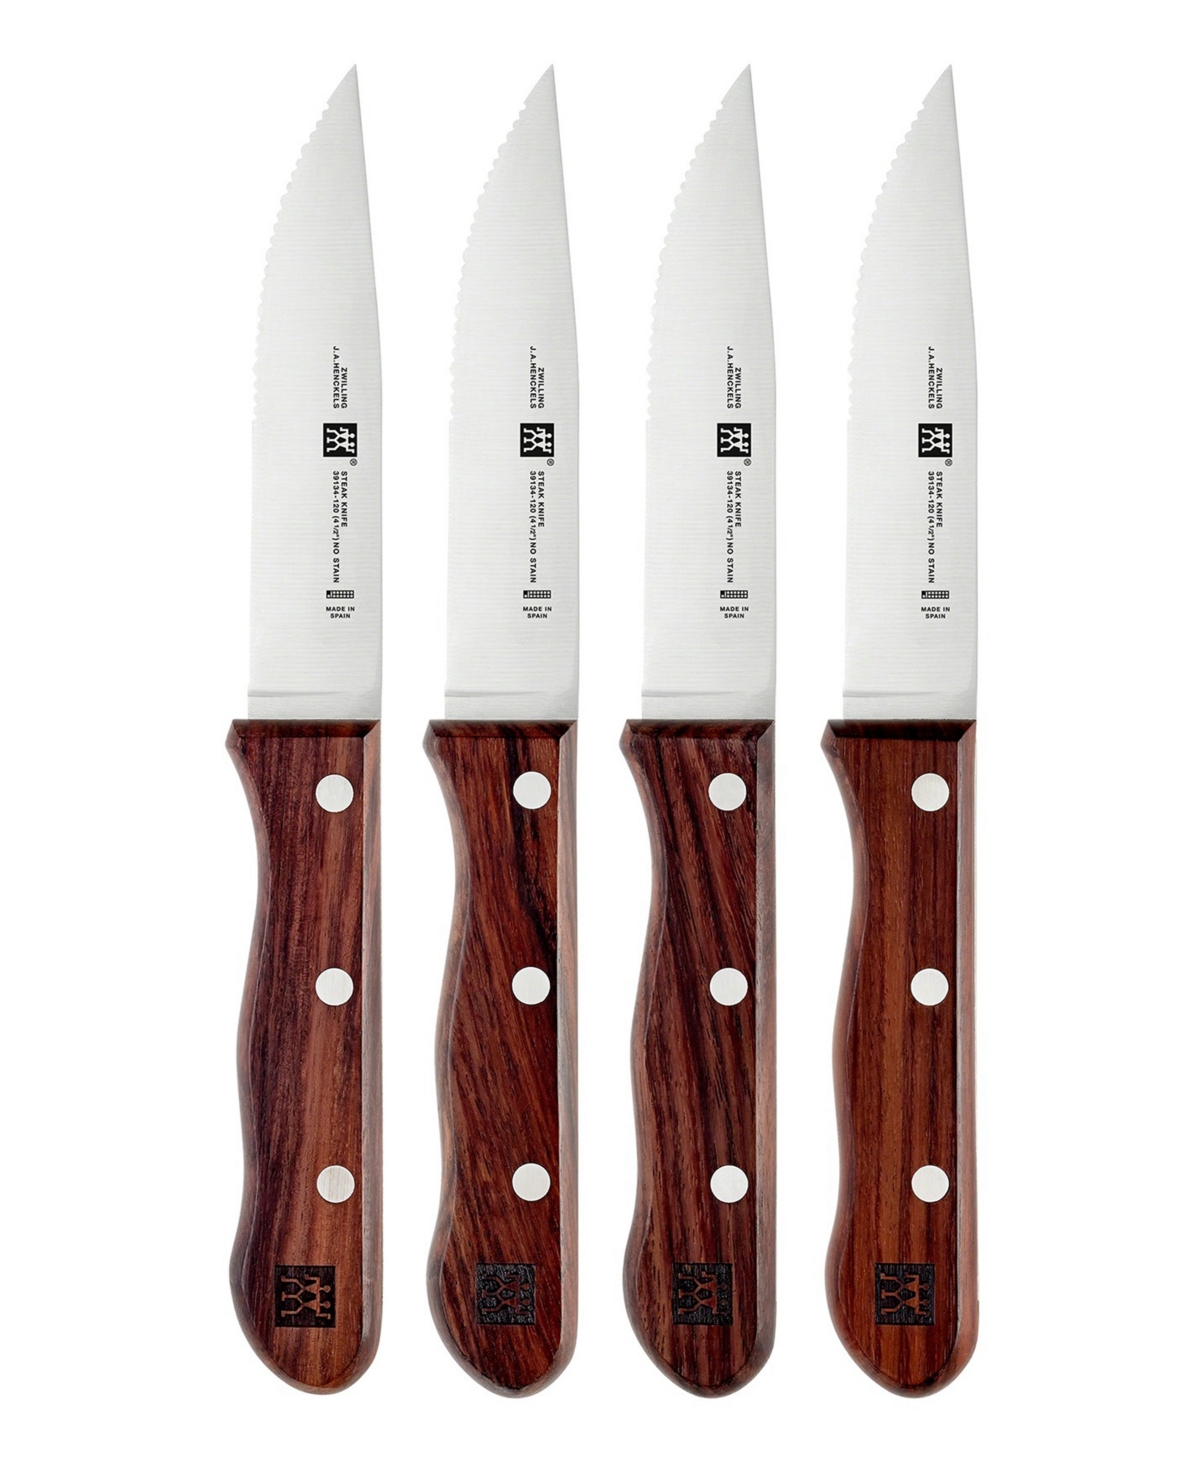 Zwilling 4-piece Steakhouse Steak Knife Set With Storage Case In Brown